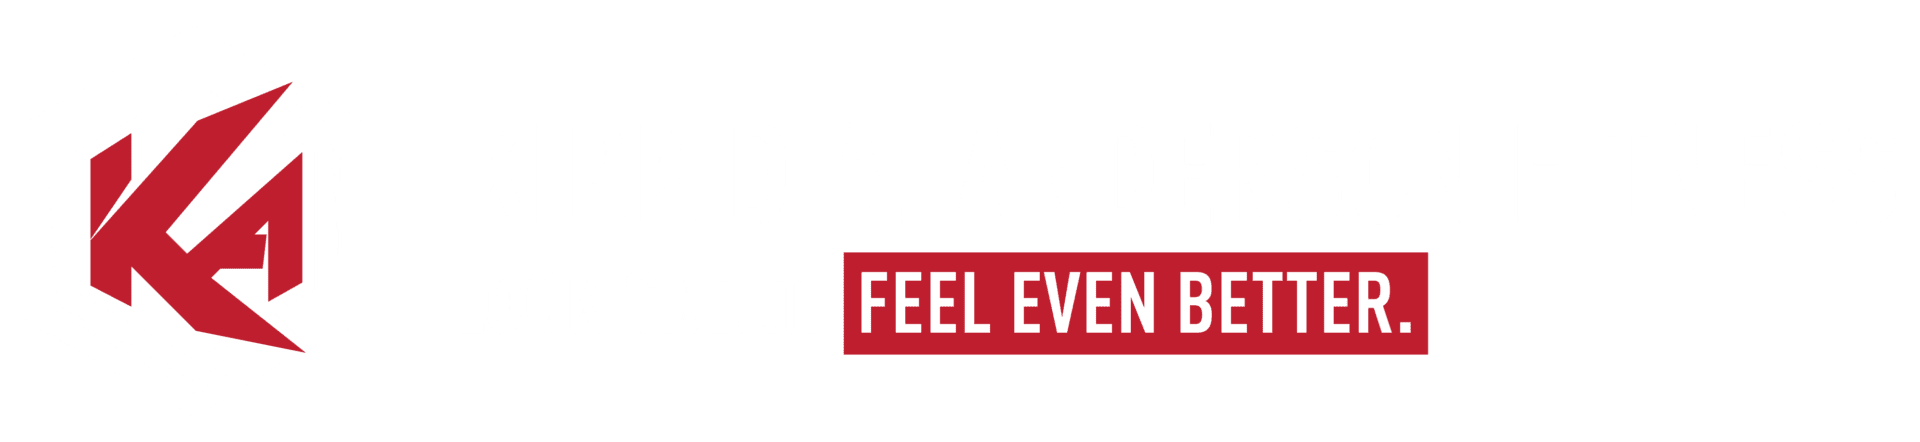 Full logo of Kirk D.A. Anderson Fitness in a transparent font